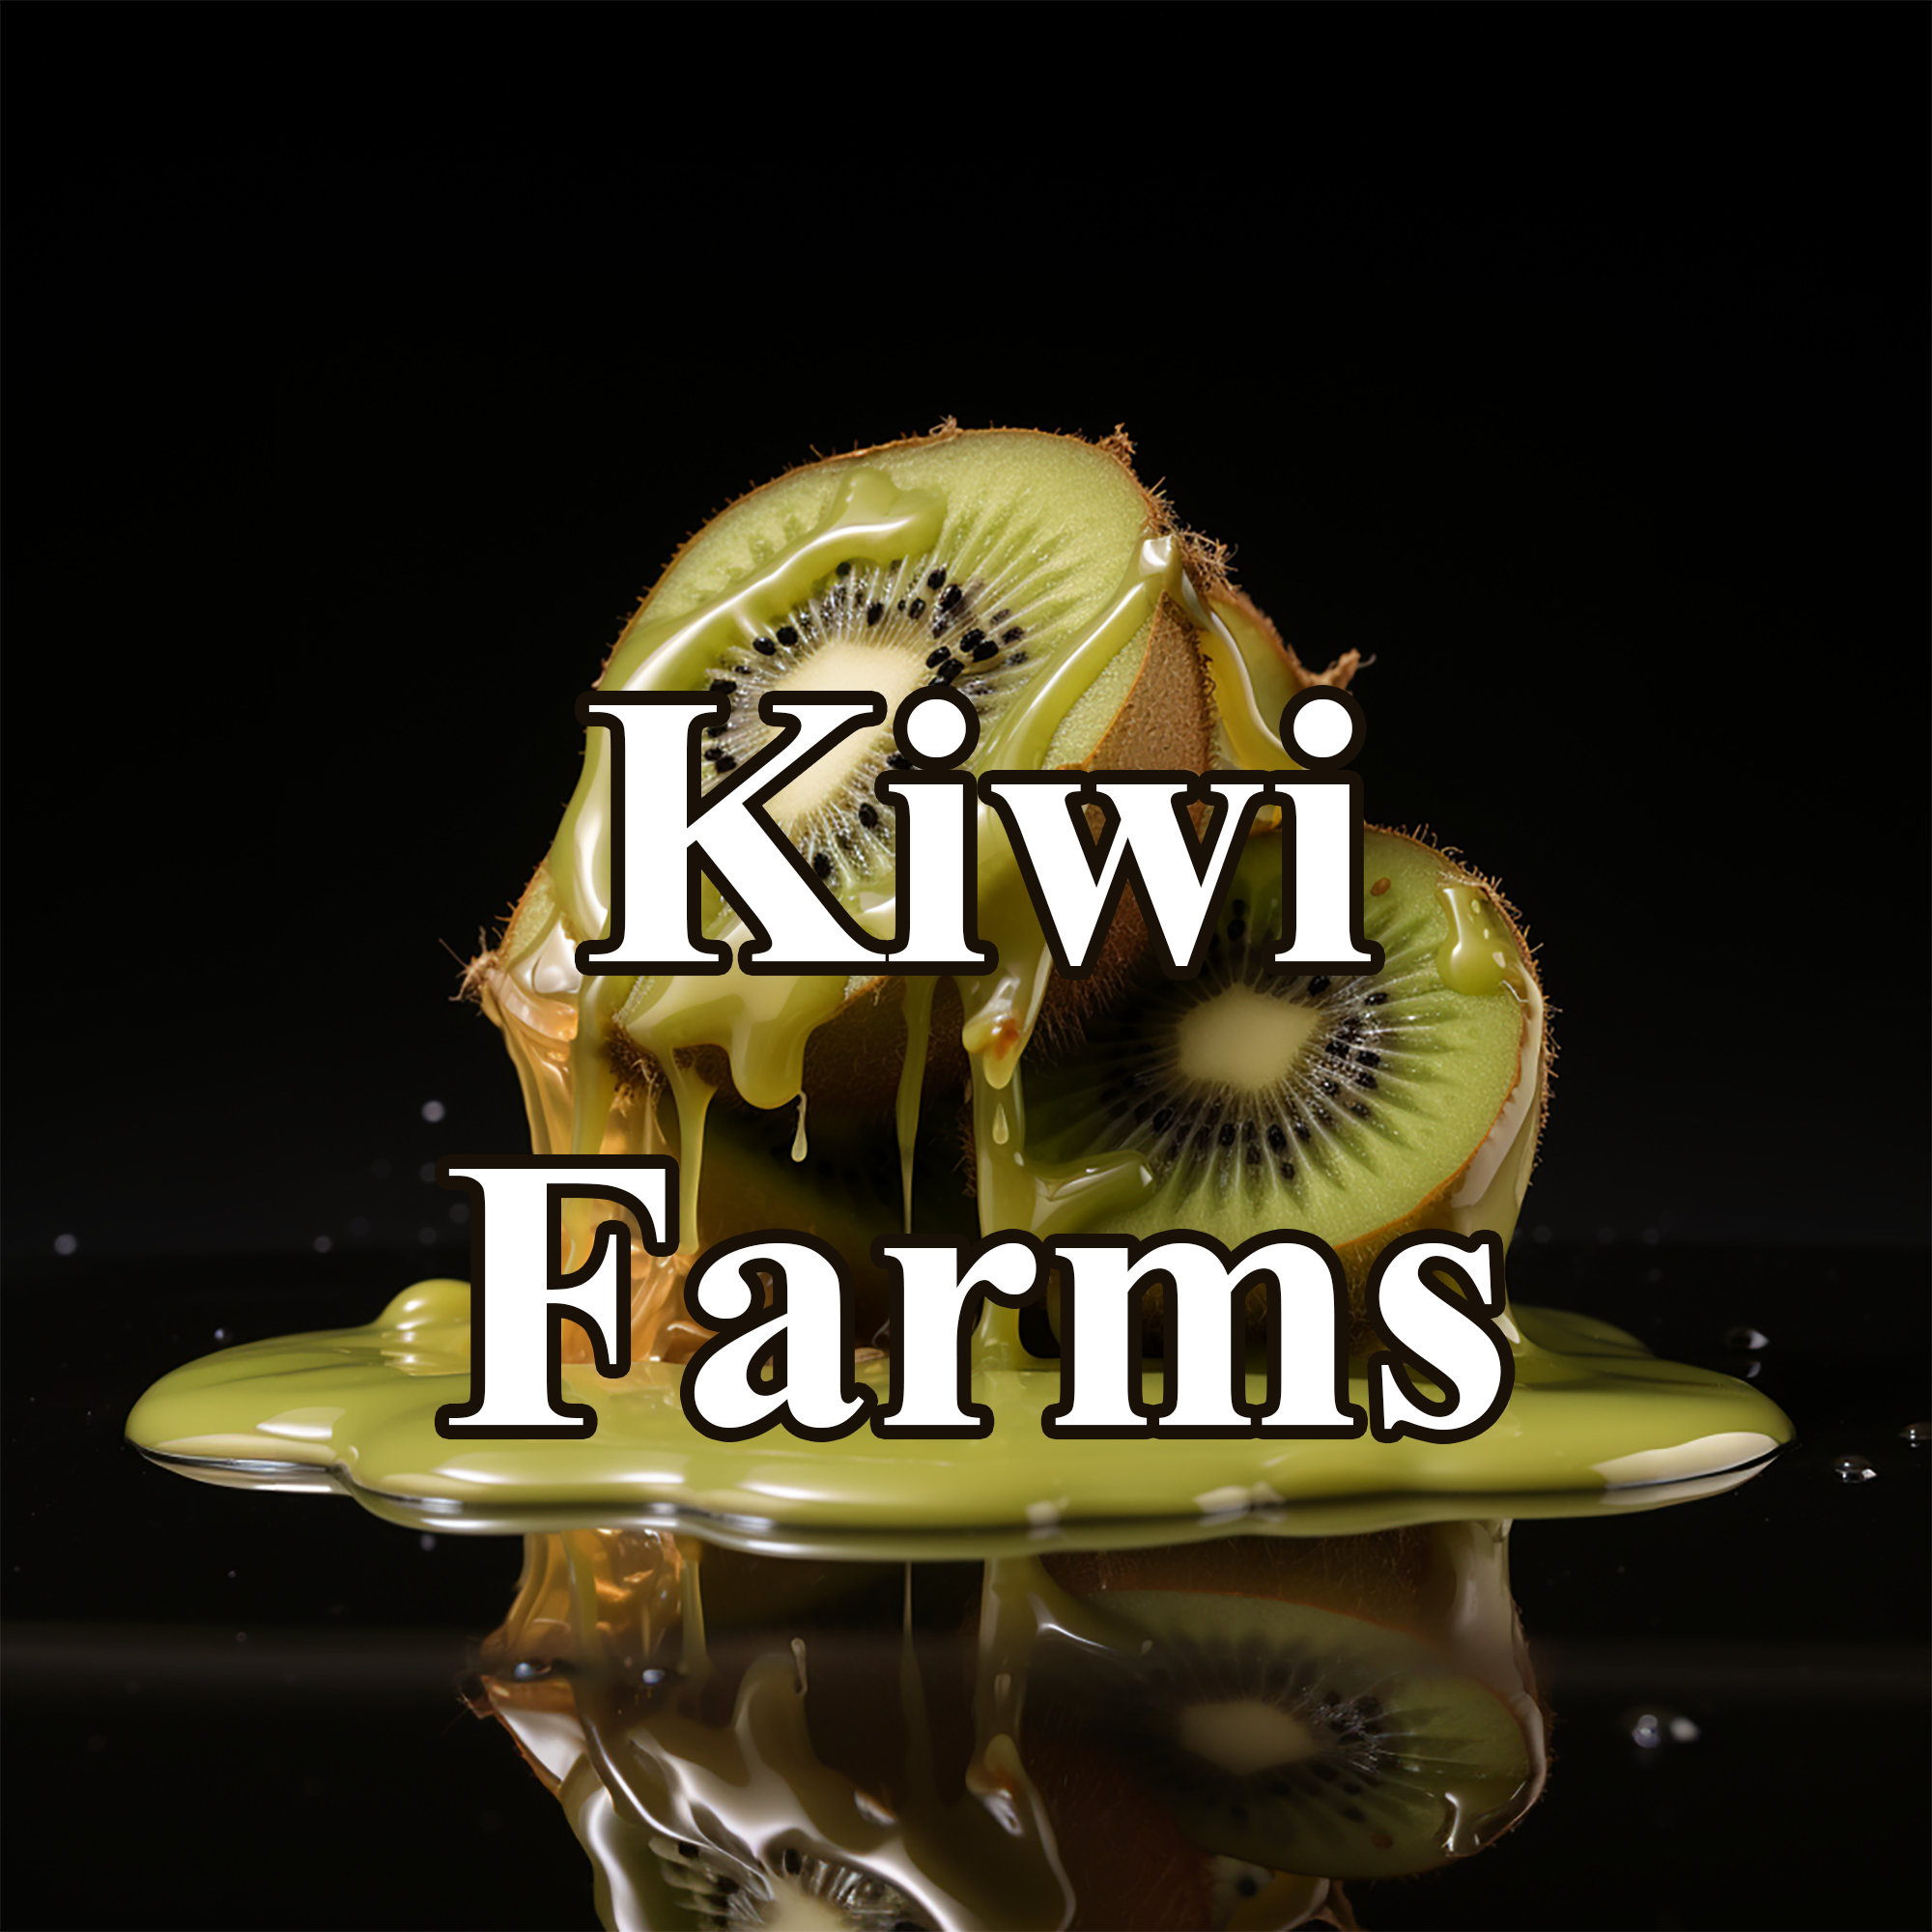 Kiwi Farms, the Infamous Alt-Right Hate Forum, Might Be off the Clearnet  for Good - LowEndBox